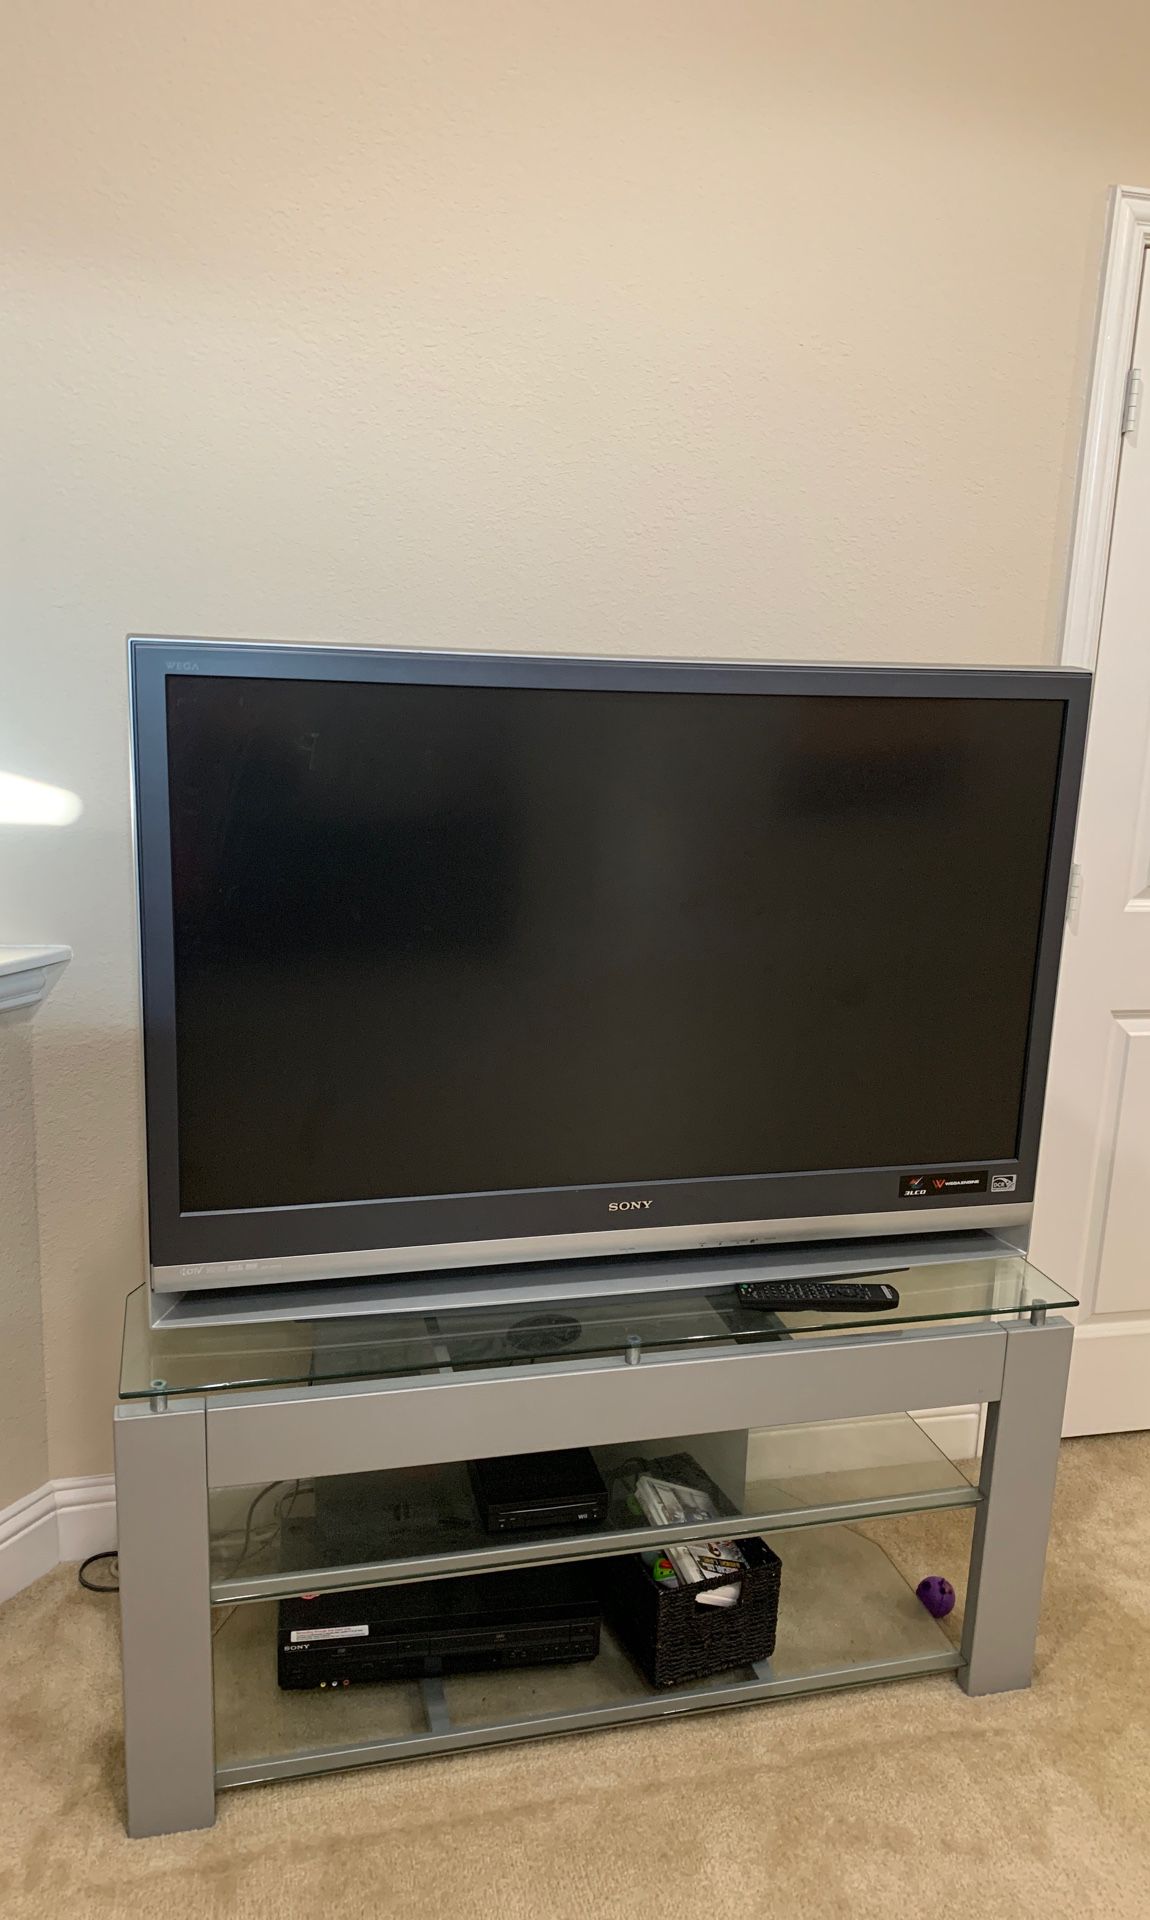 SONY TV 50 inch along with glass stand ( perfect working condition)